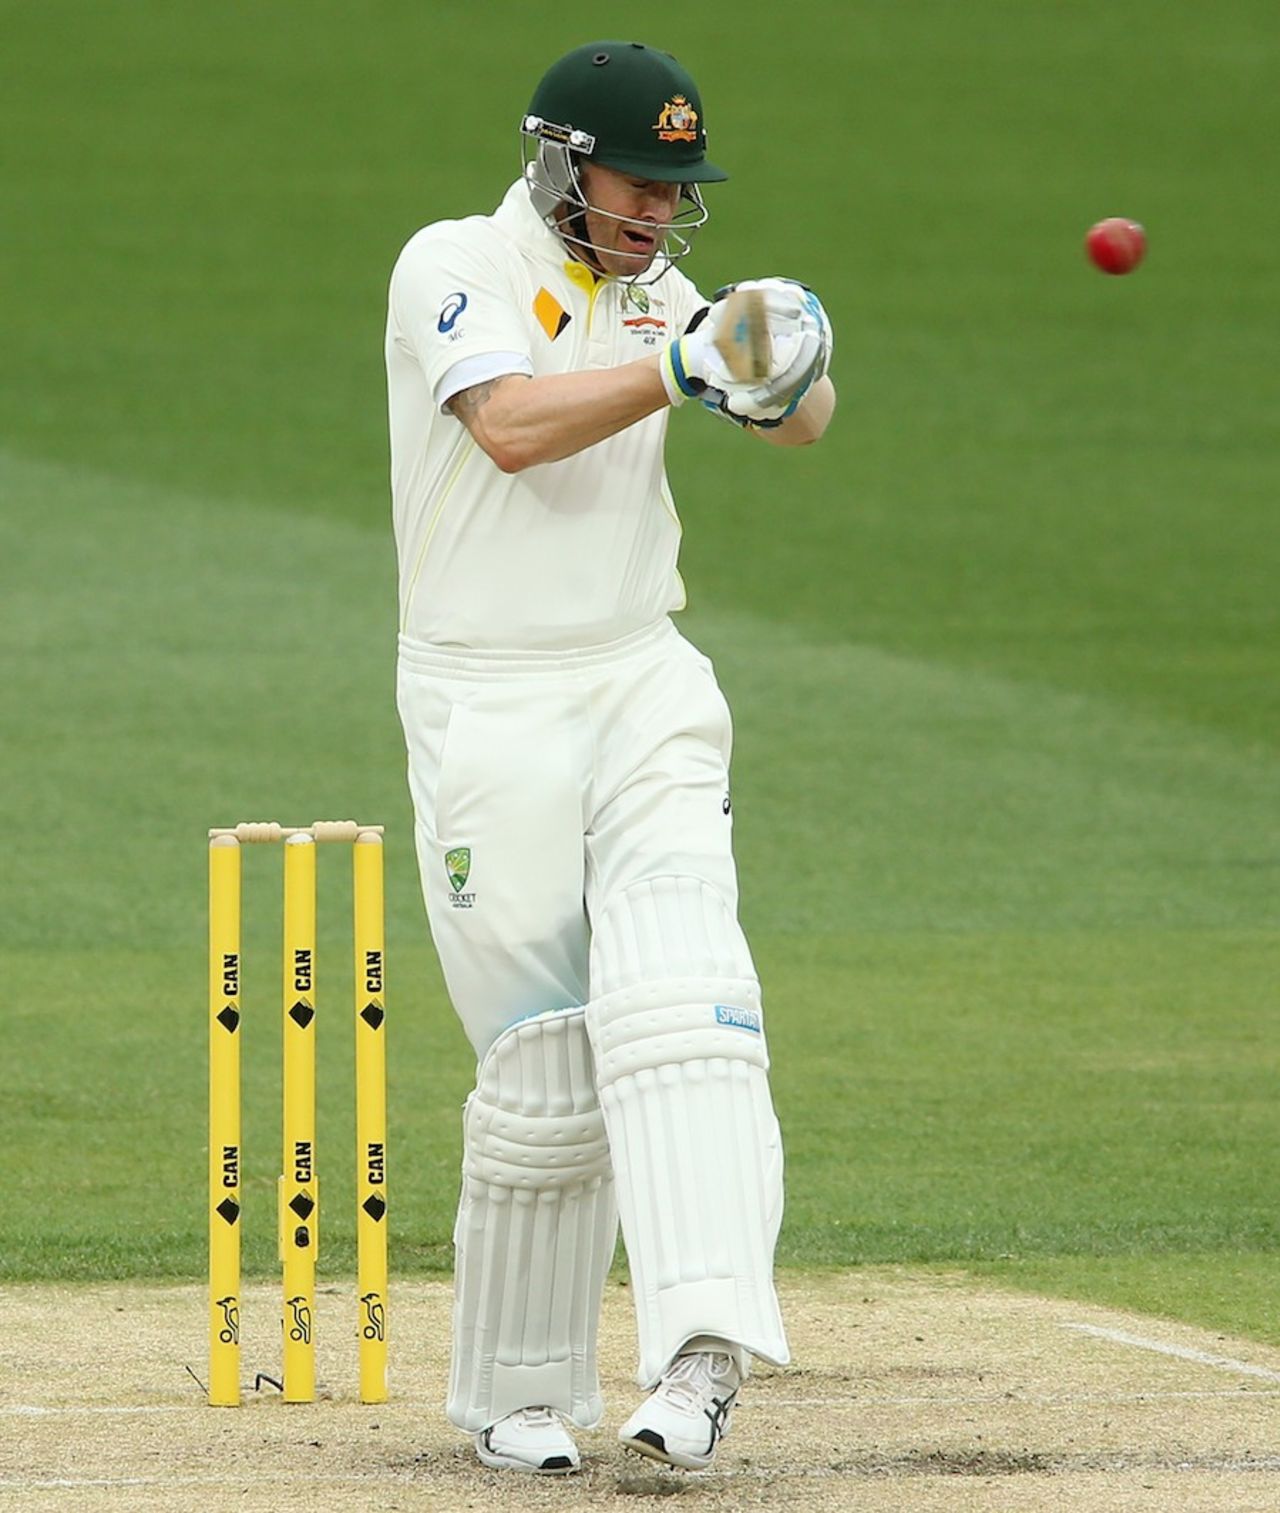 Michael Clarke winces as he pulls, Australia v India, 1st Test, Adelaide, 2nd day, December 10, 2014